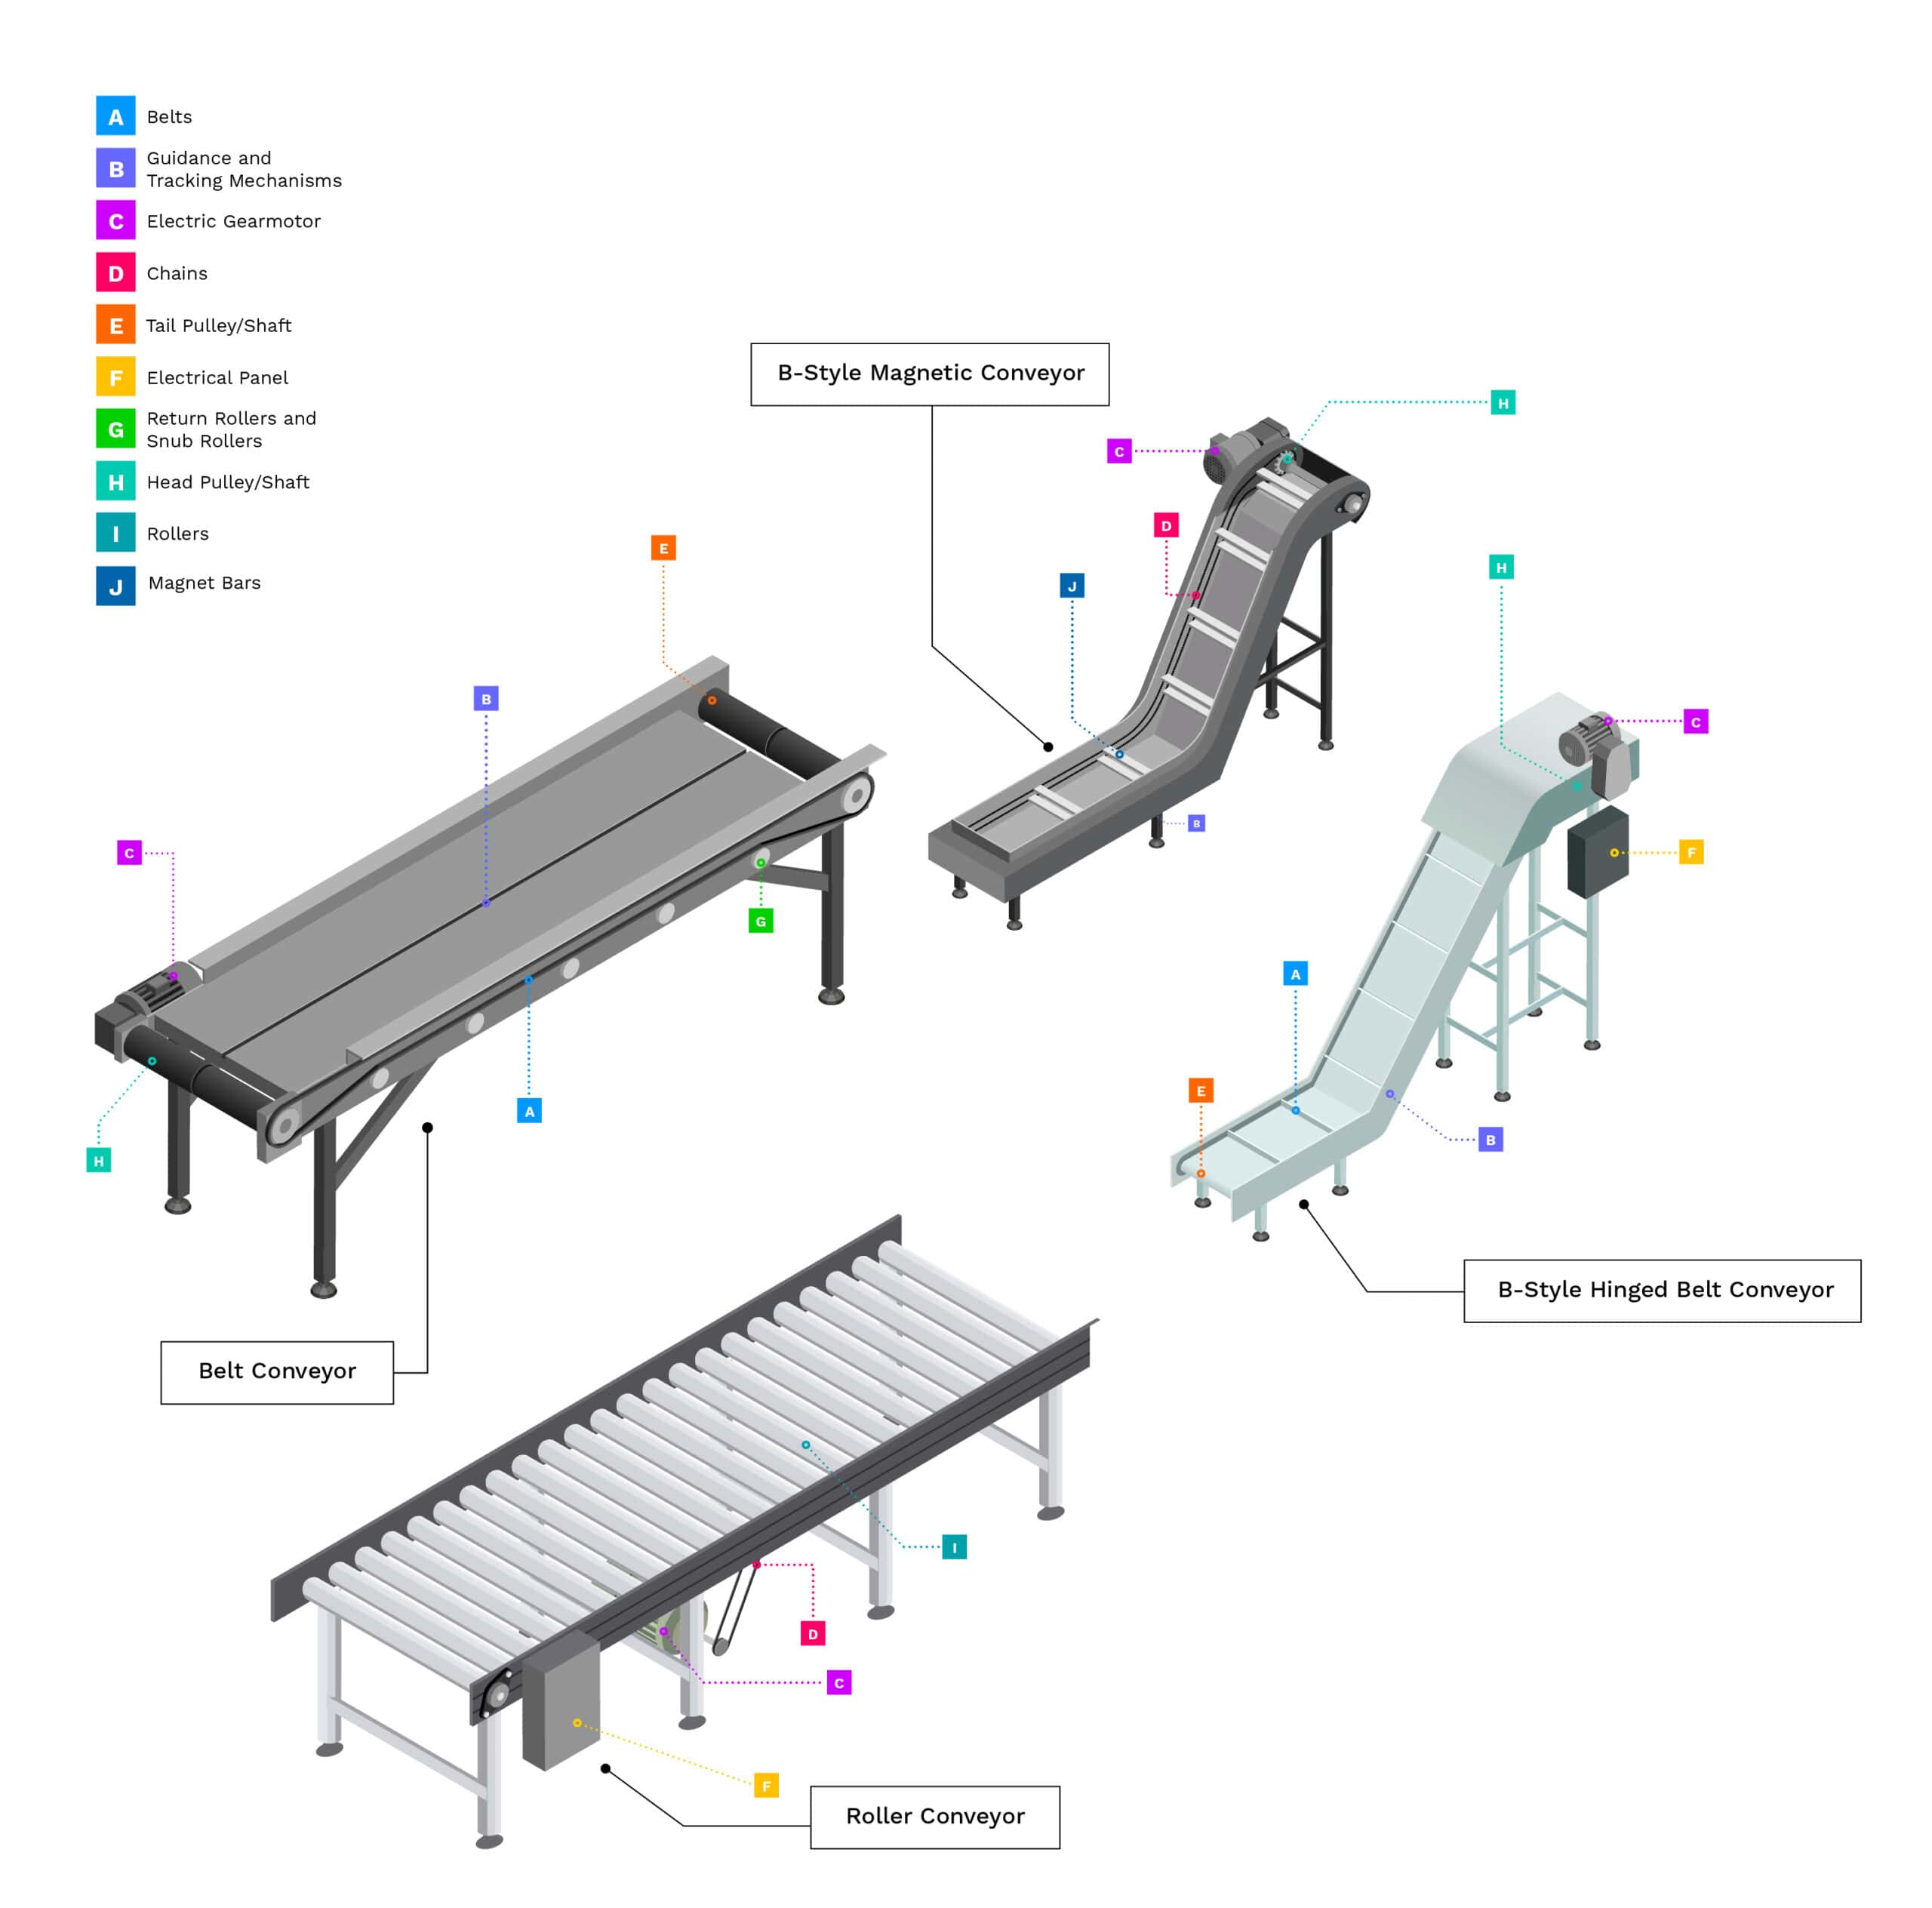 Components of Conveyor Systems